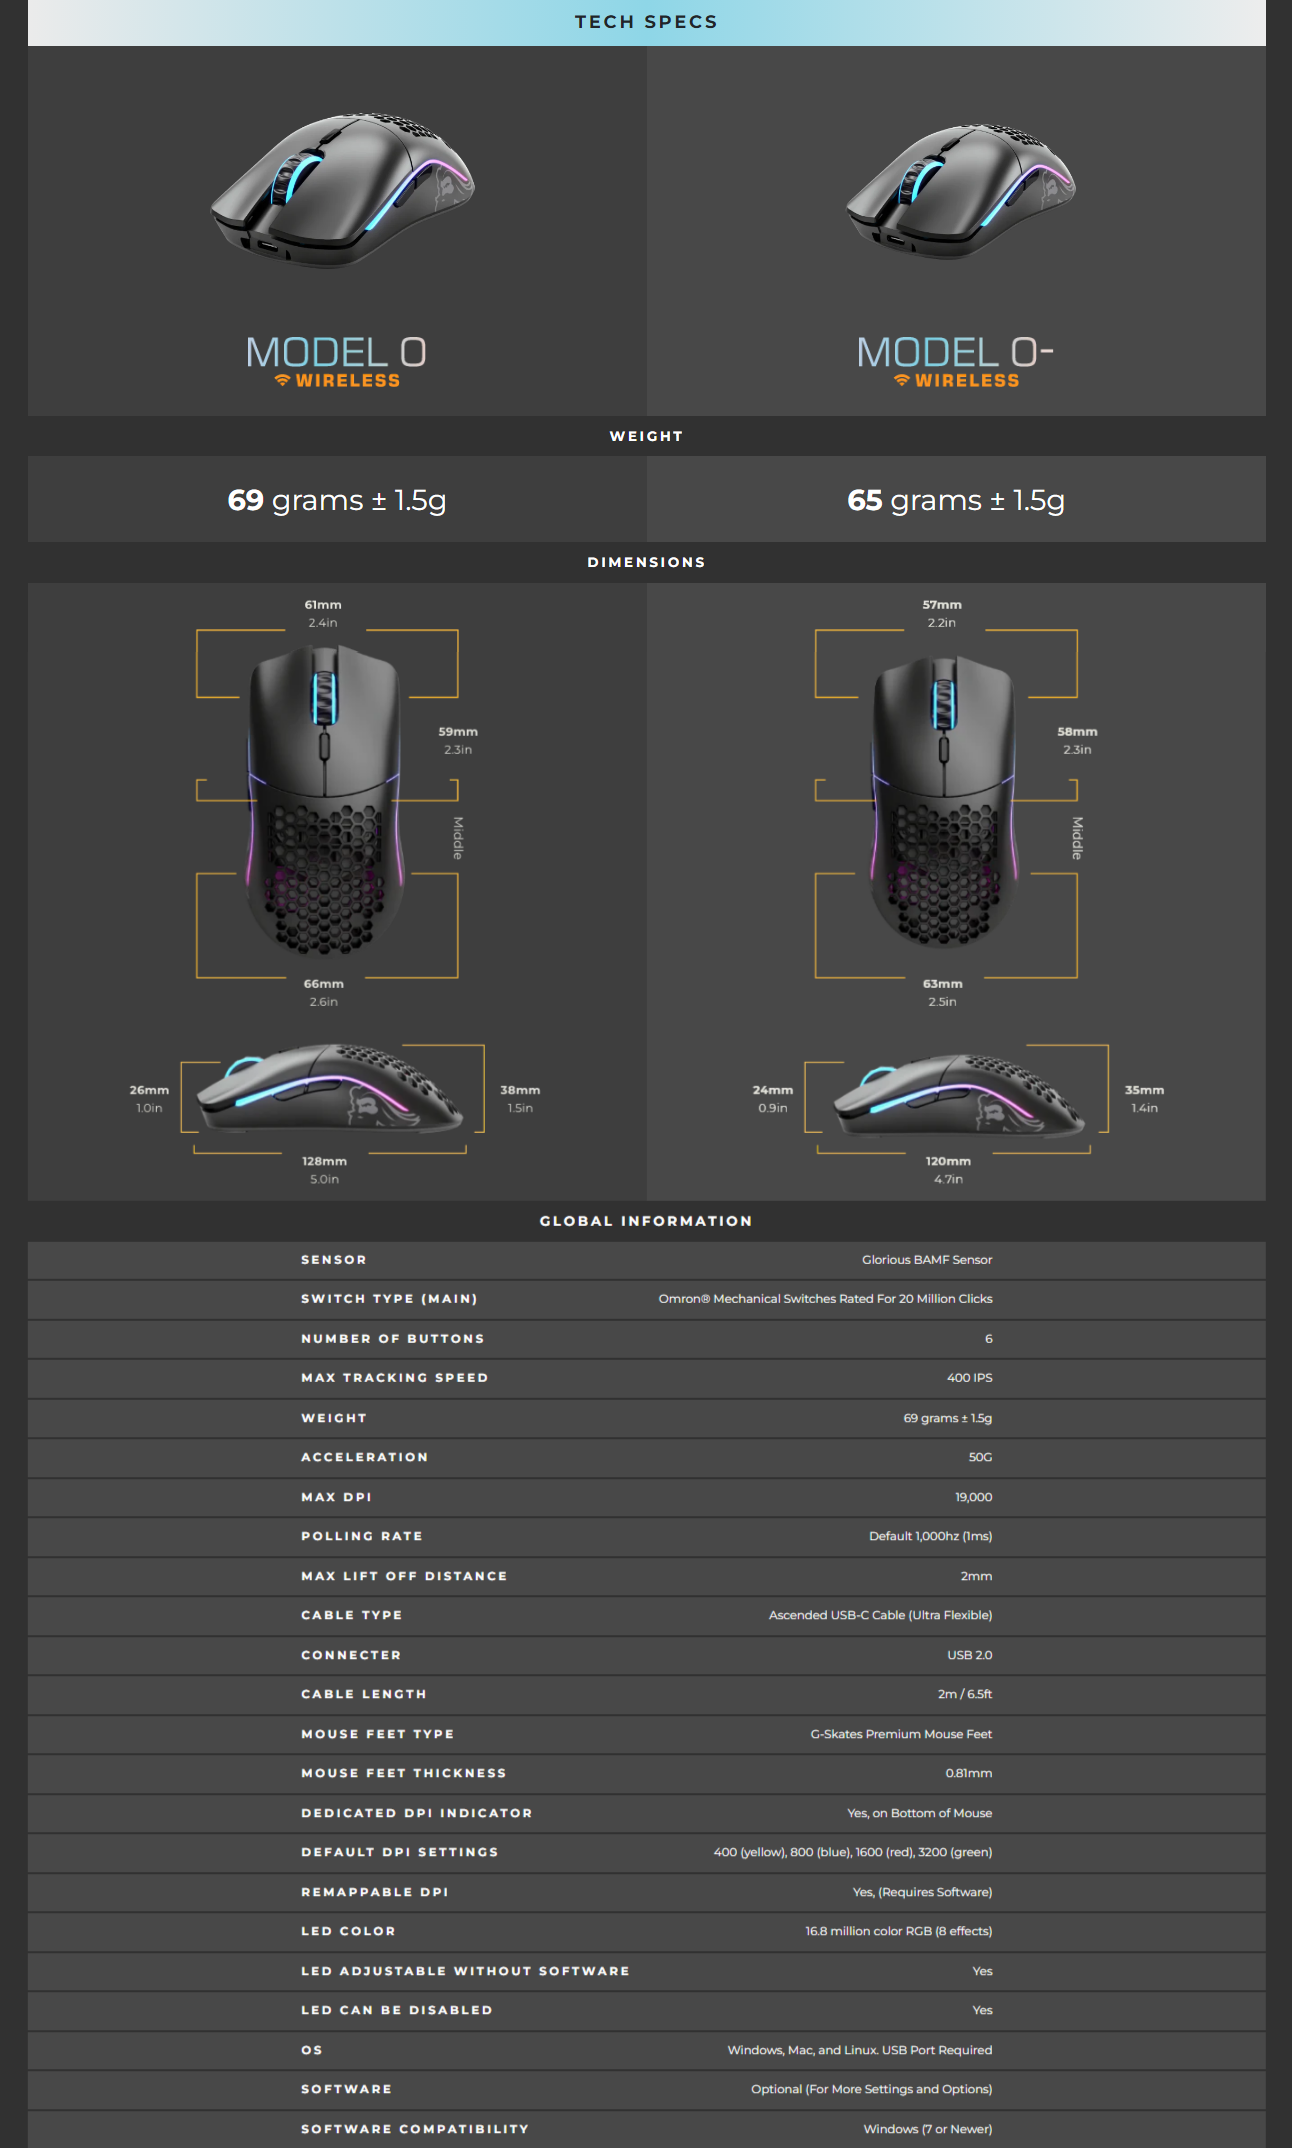 A large marketing image providing additional information about the product Glorious Model O Ambidextrous Wireless Gaming Mouse - Matte Black - Additional alt info not provided